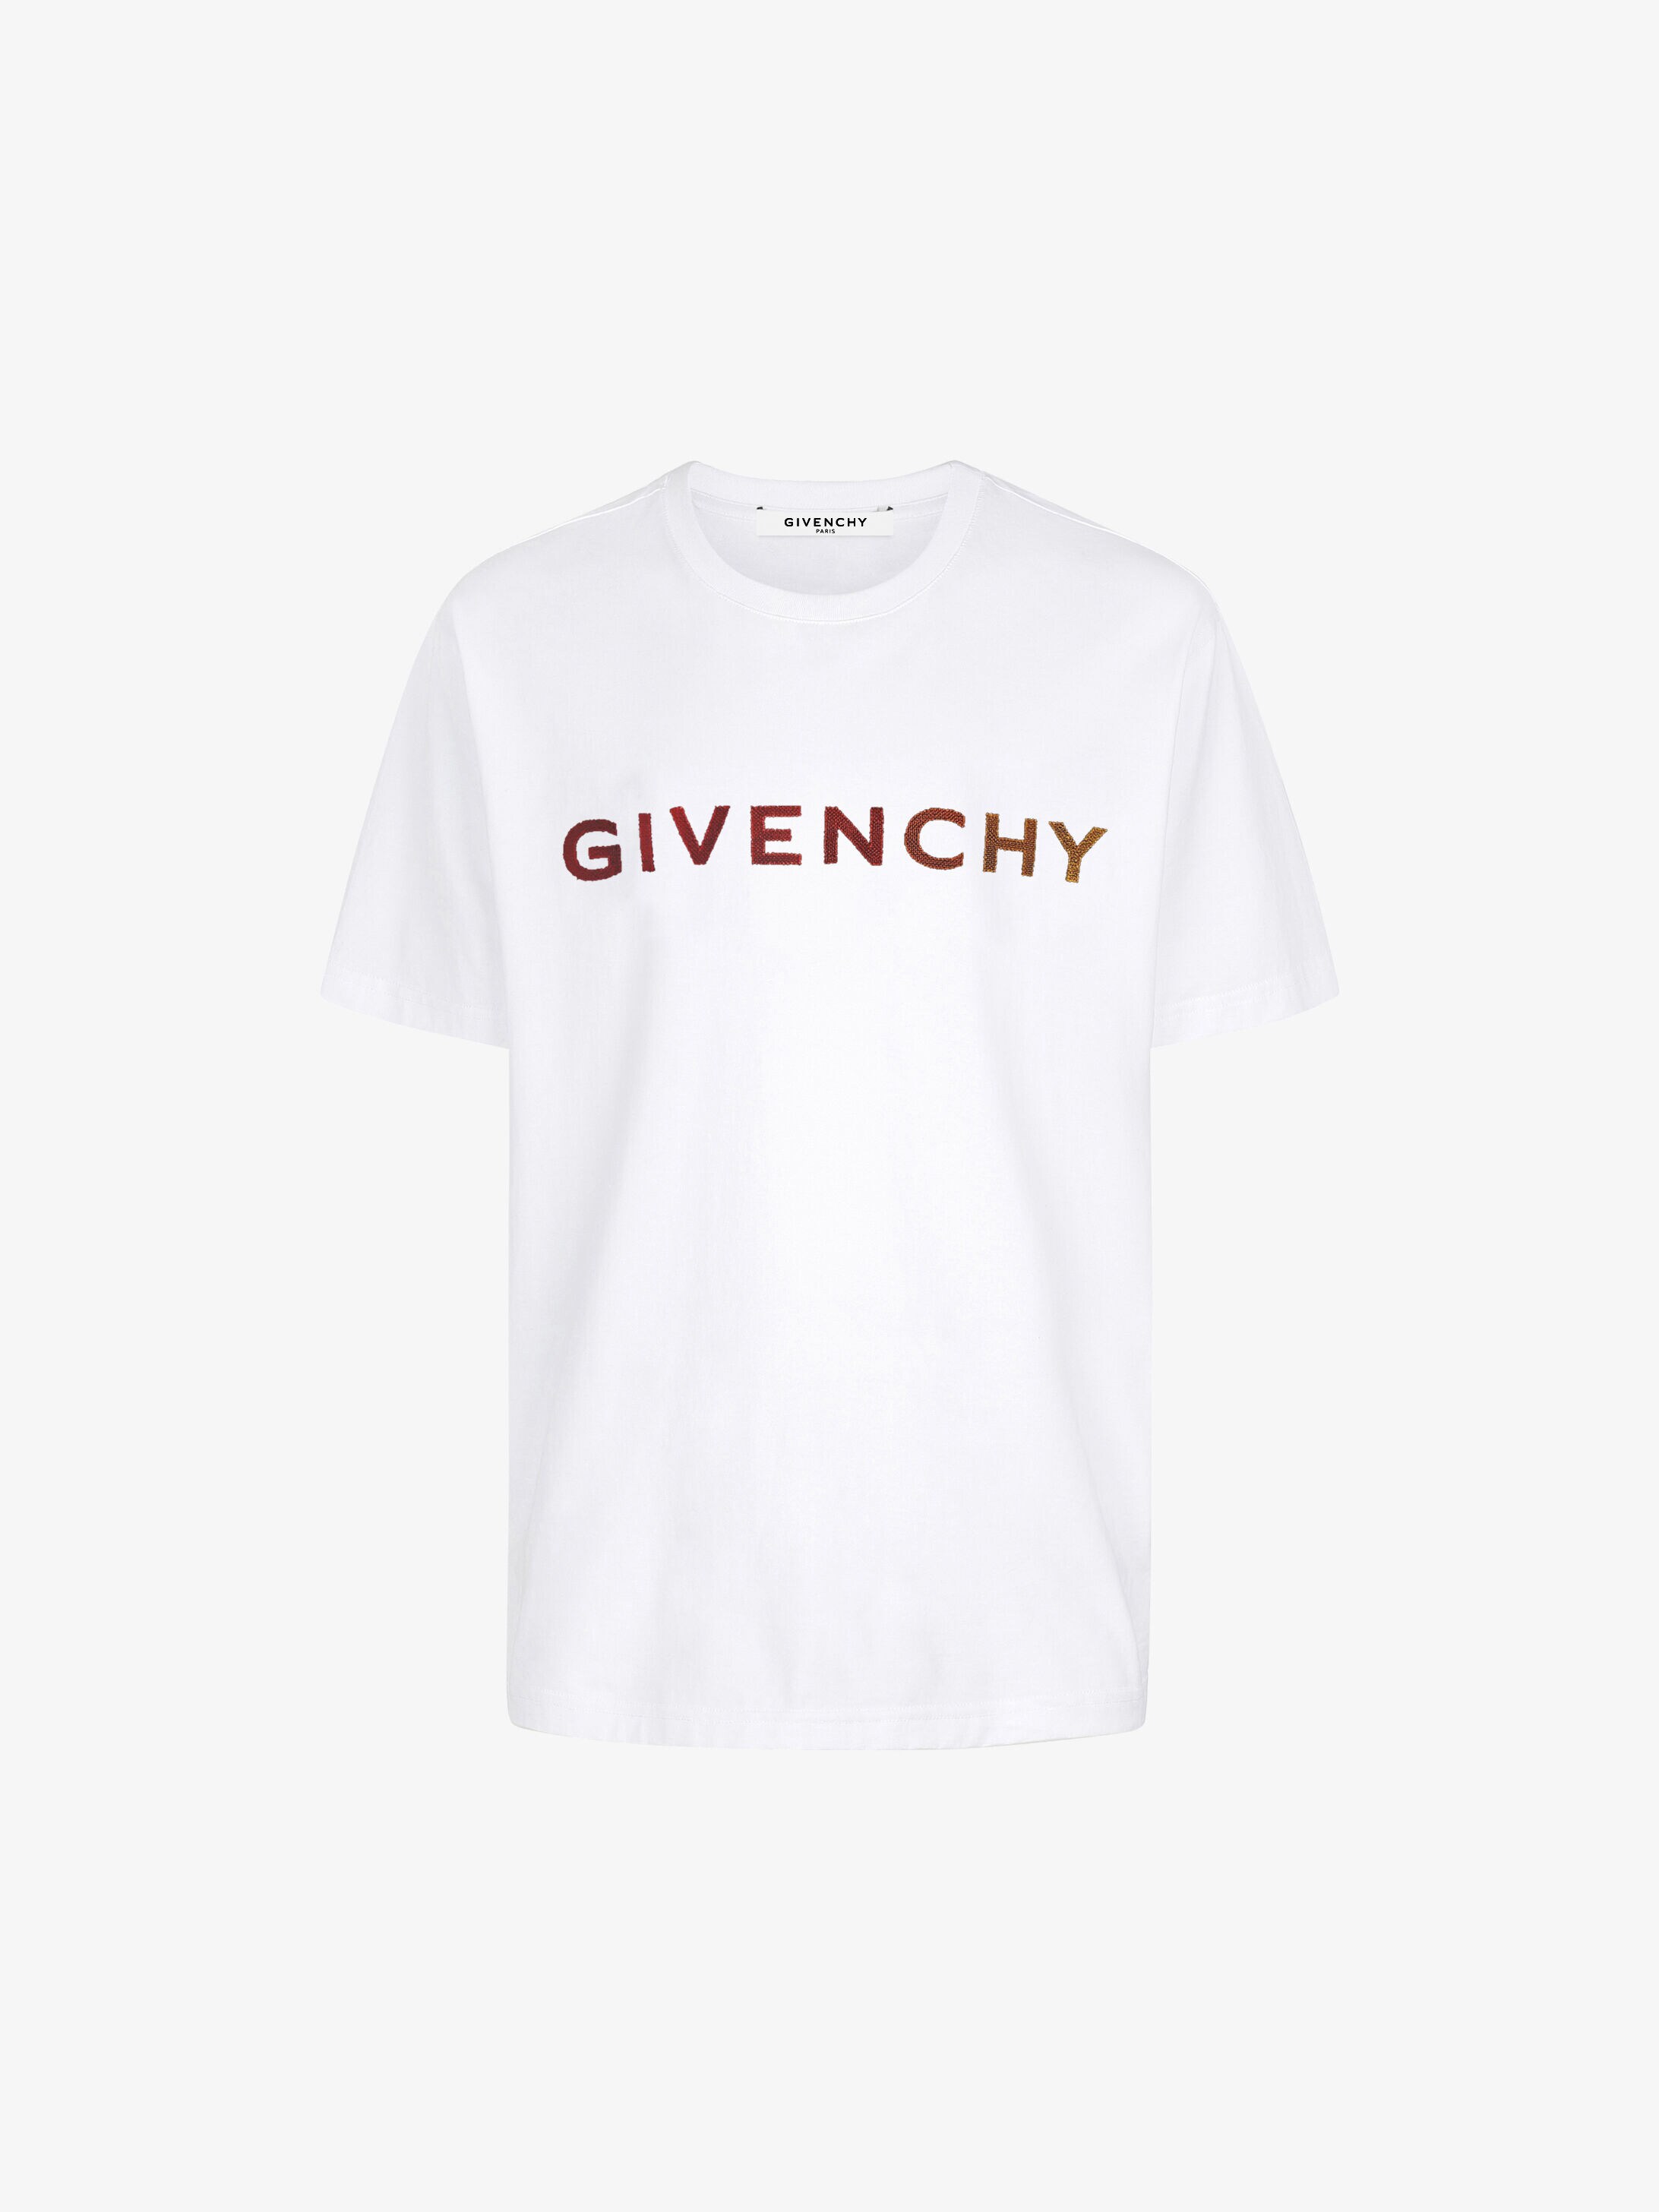 black and red givenchy t shirt